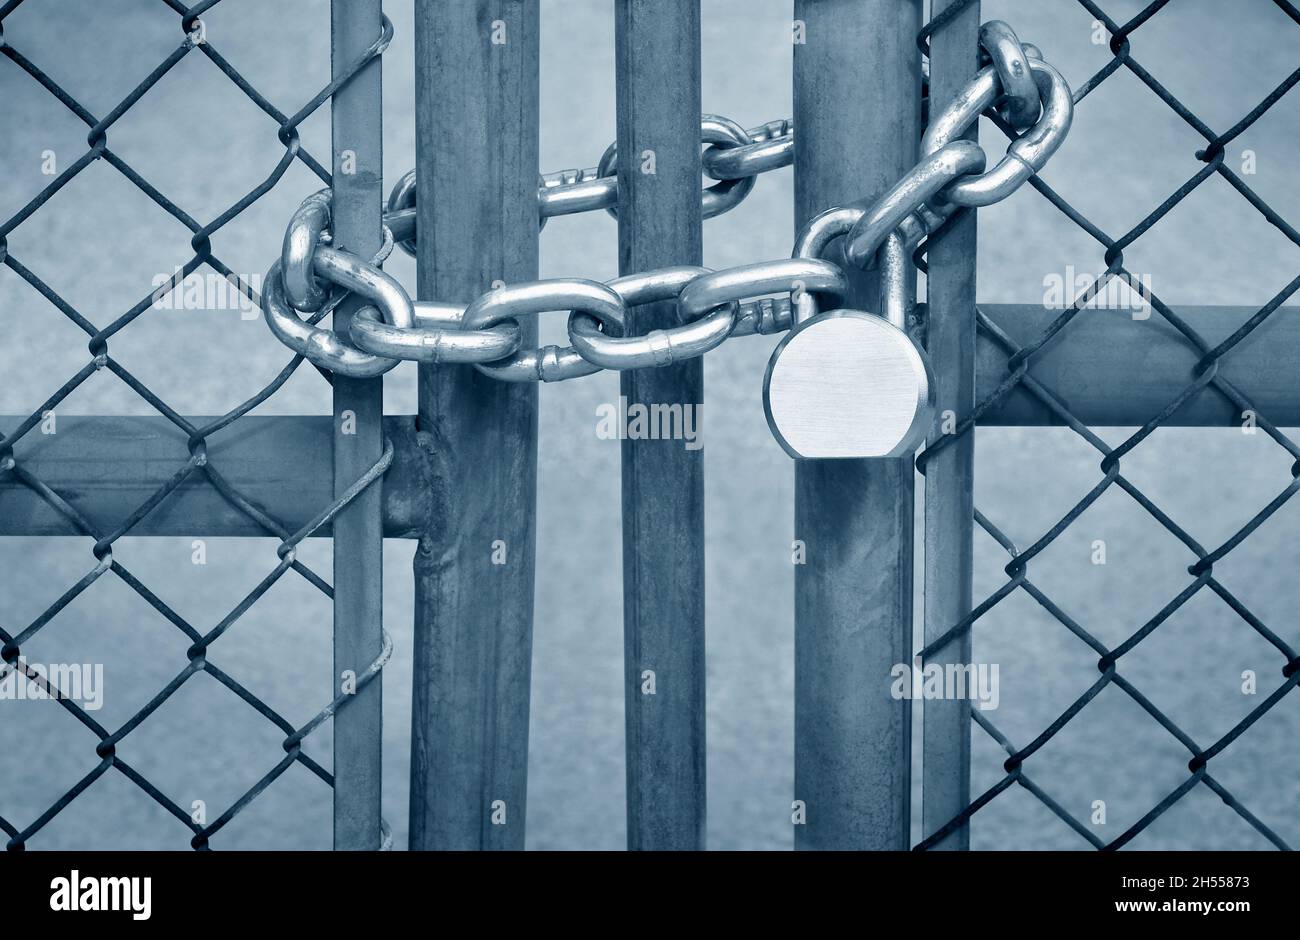 A padlocked chainlink fence gate Stock Photo